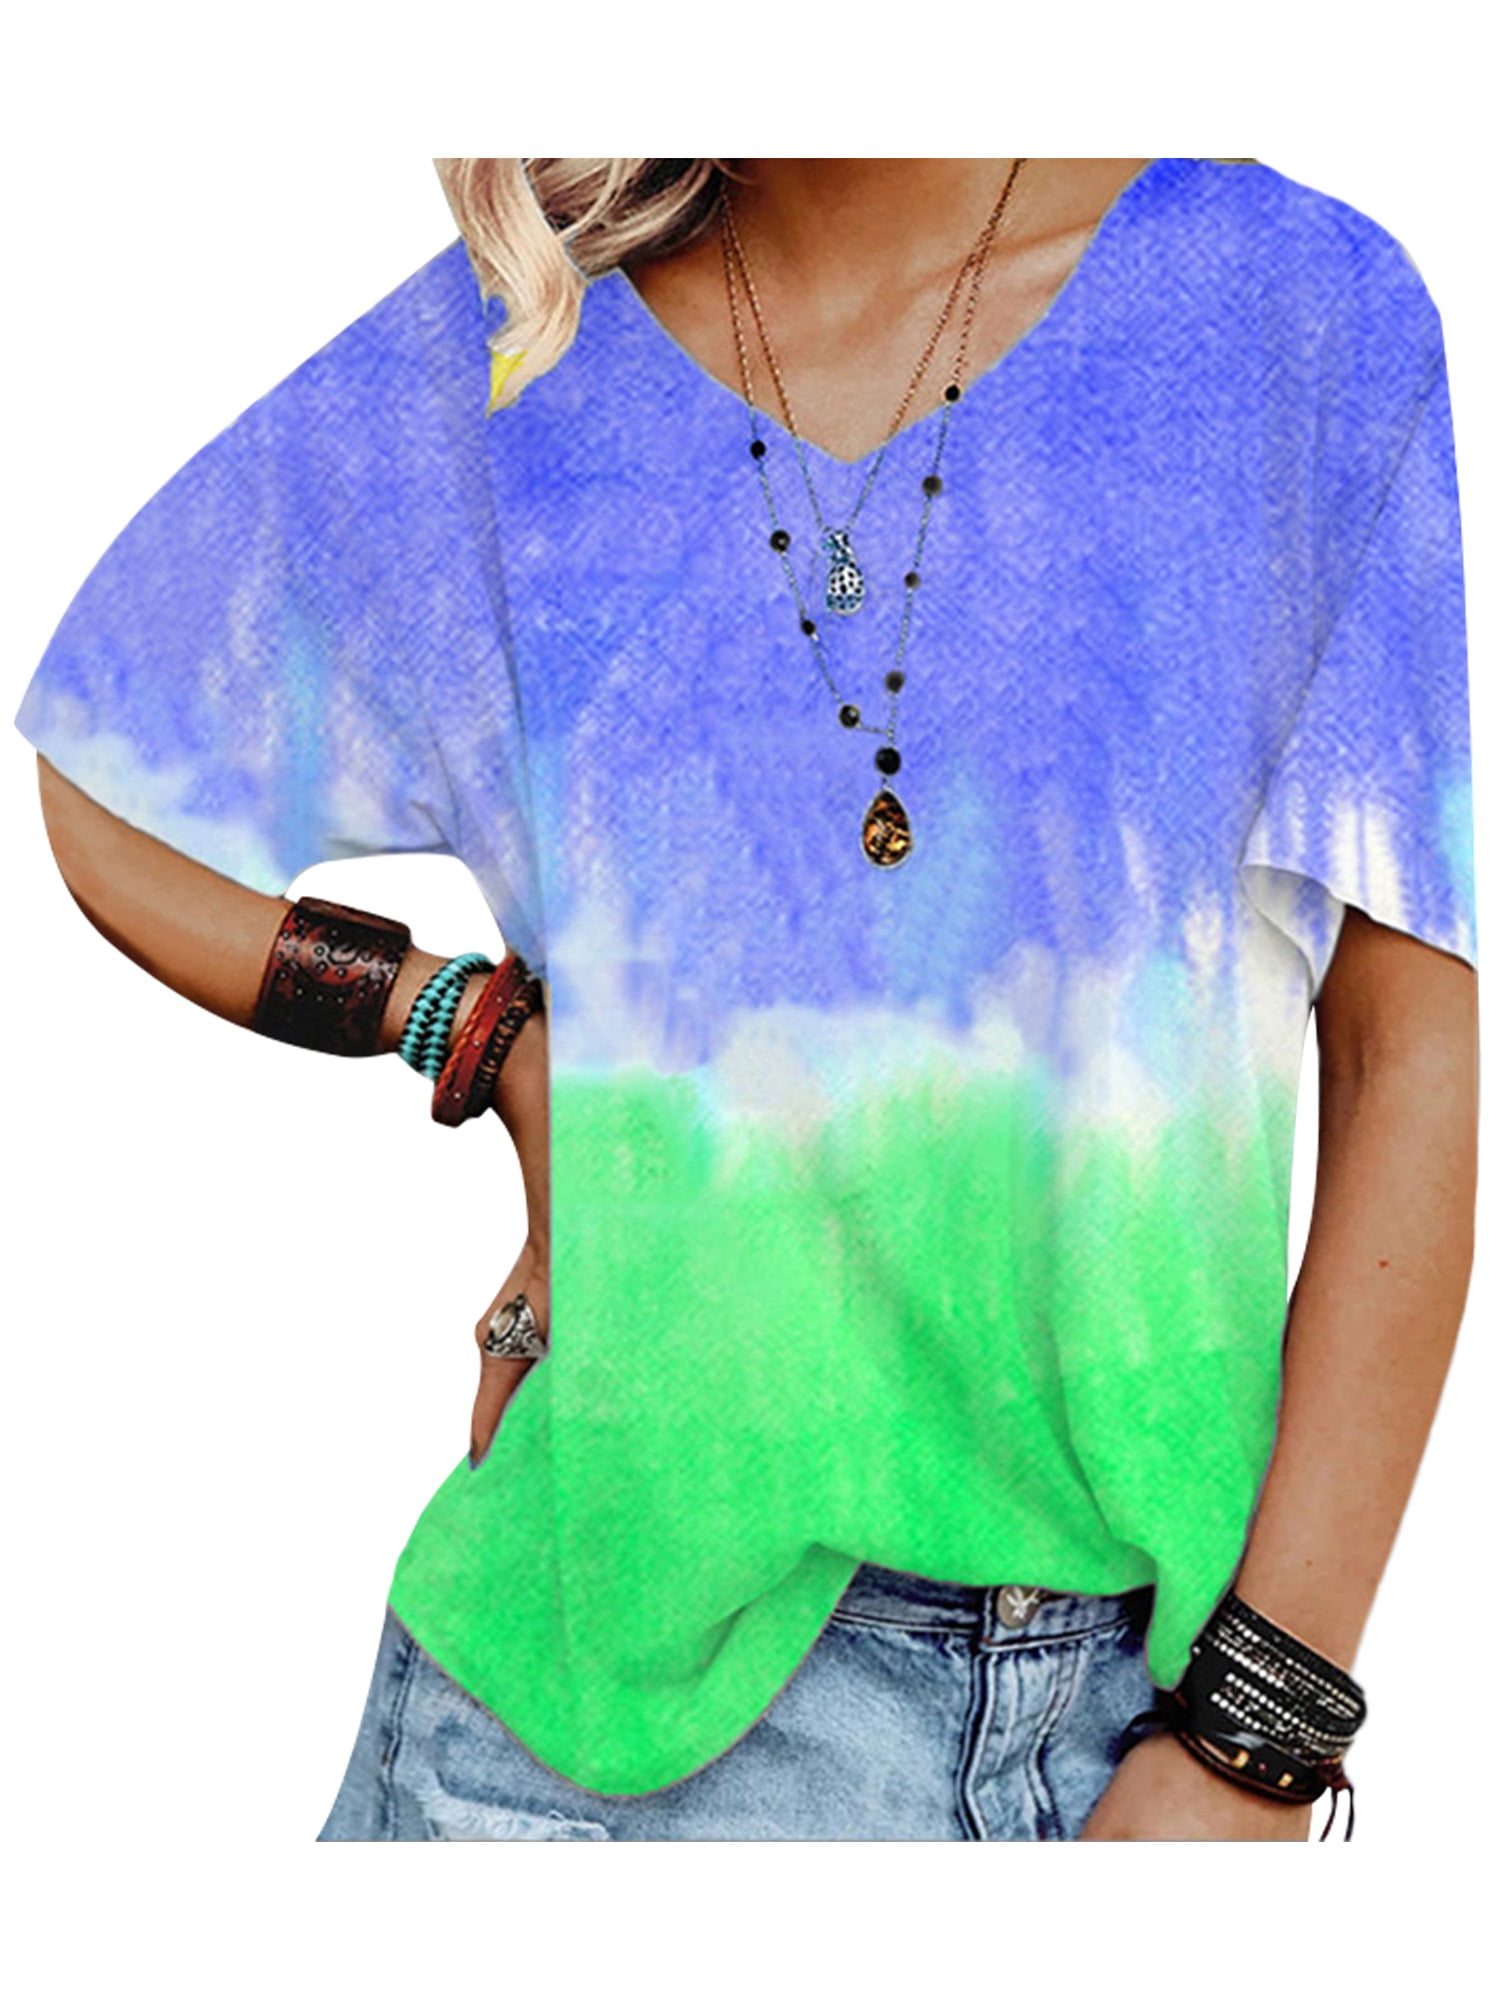 Womens Tops Tie Dye V Neck Tee Casual Short Sleeve T Shirts Casual Loose Gradient Shirt Blouse Dark Blue 